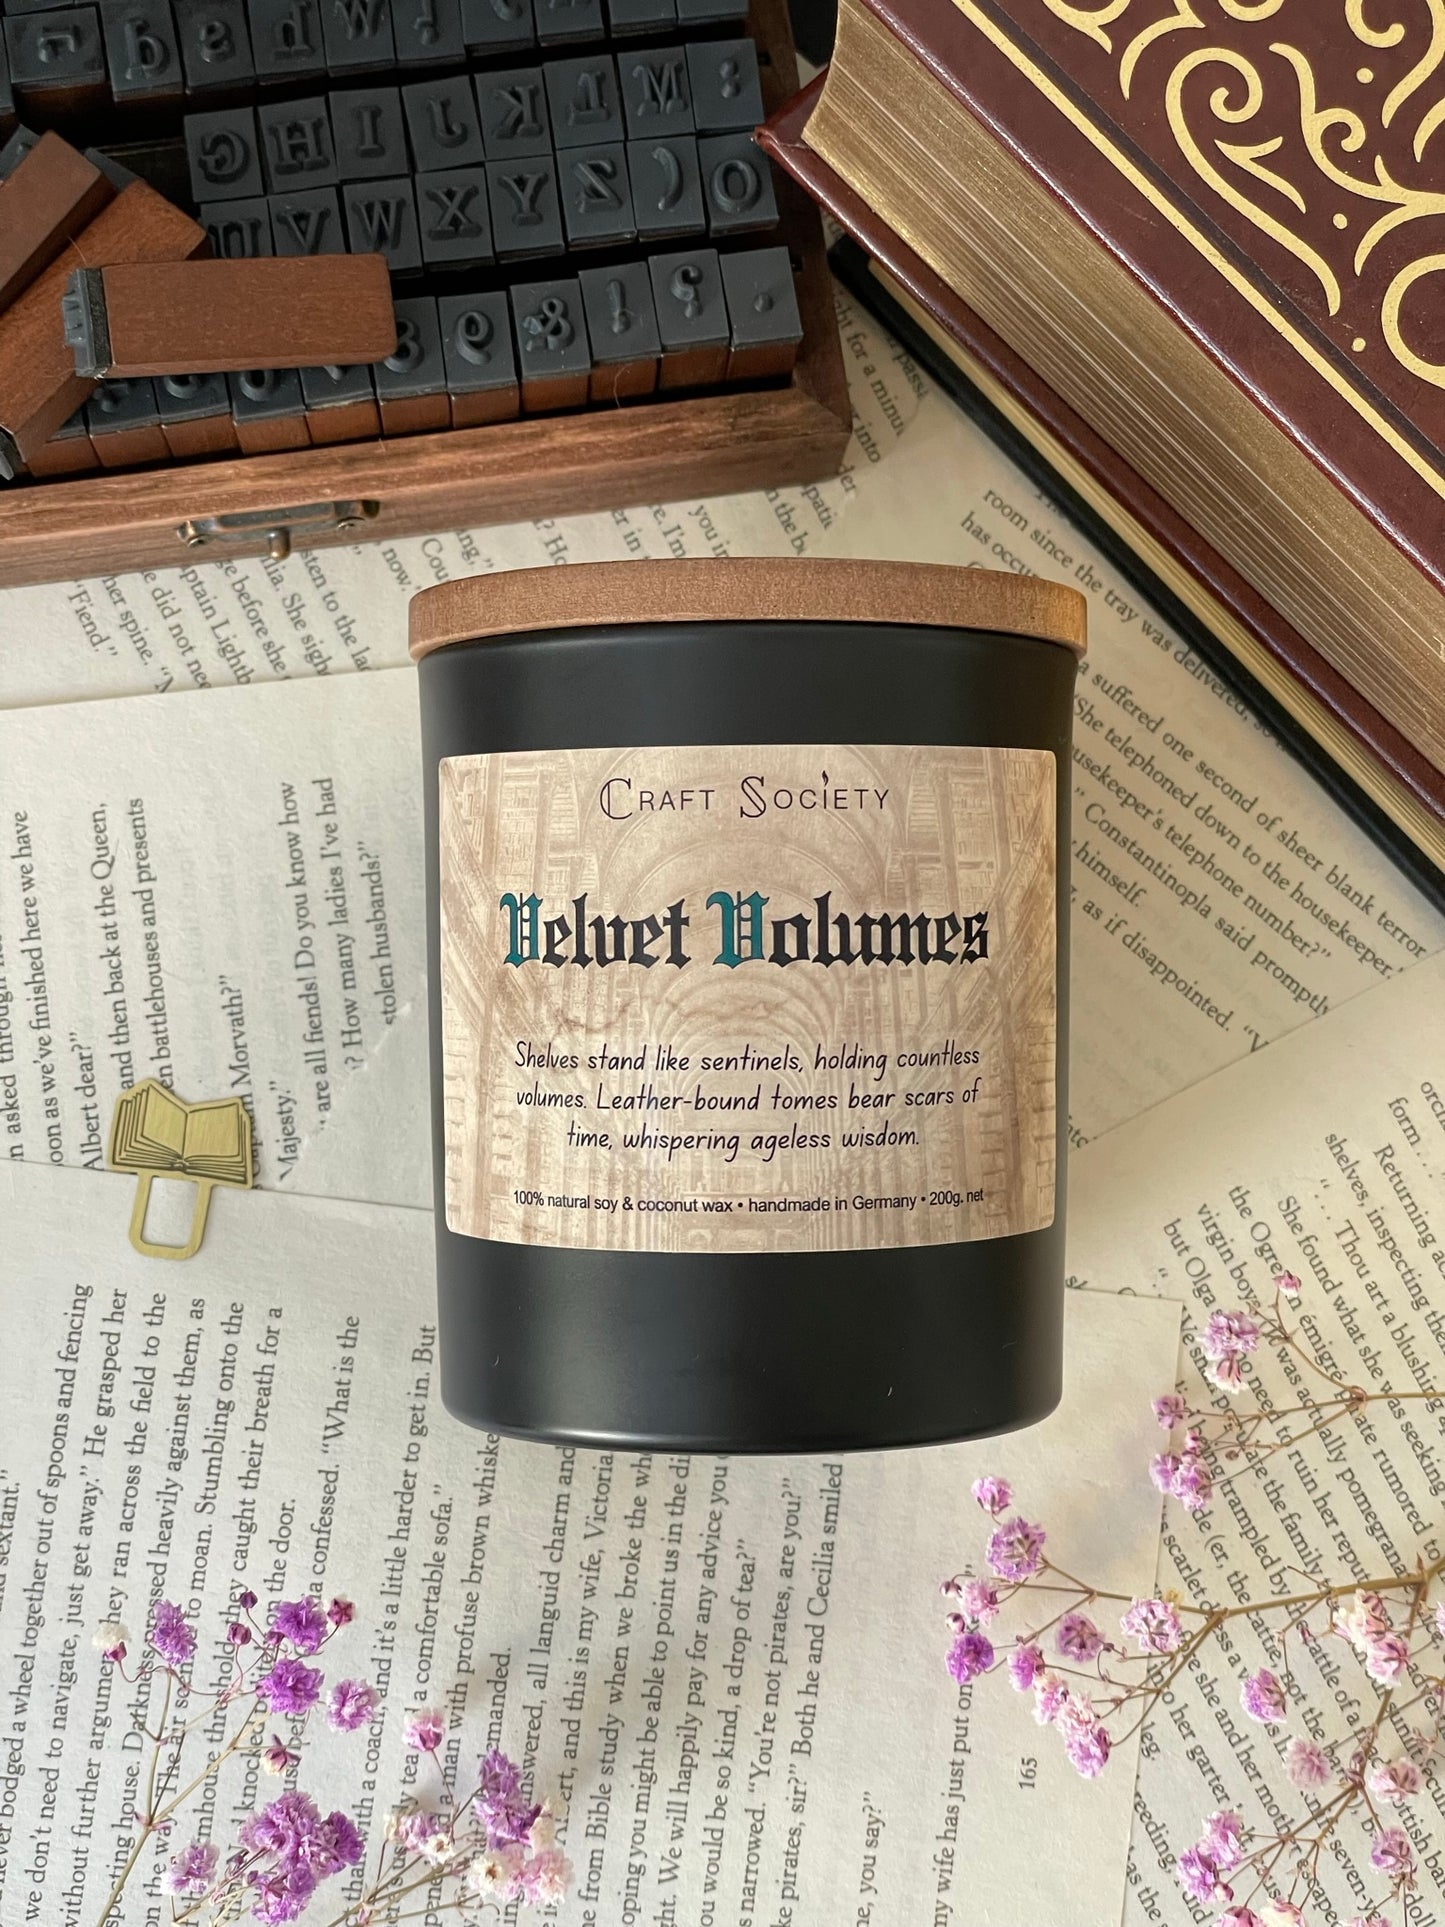 A deluxe scented candle in a black jar on a decorated background with books flowers and texts from above